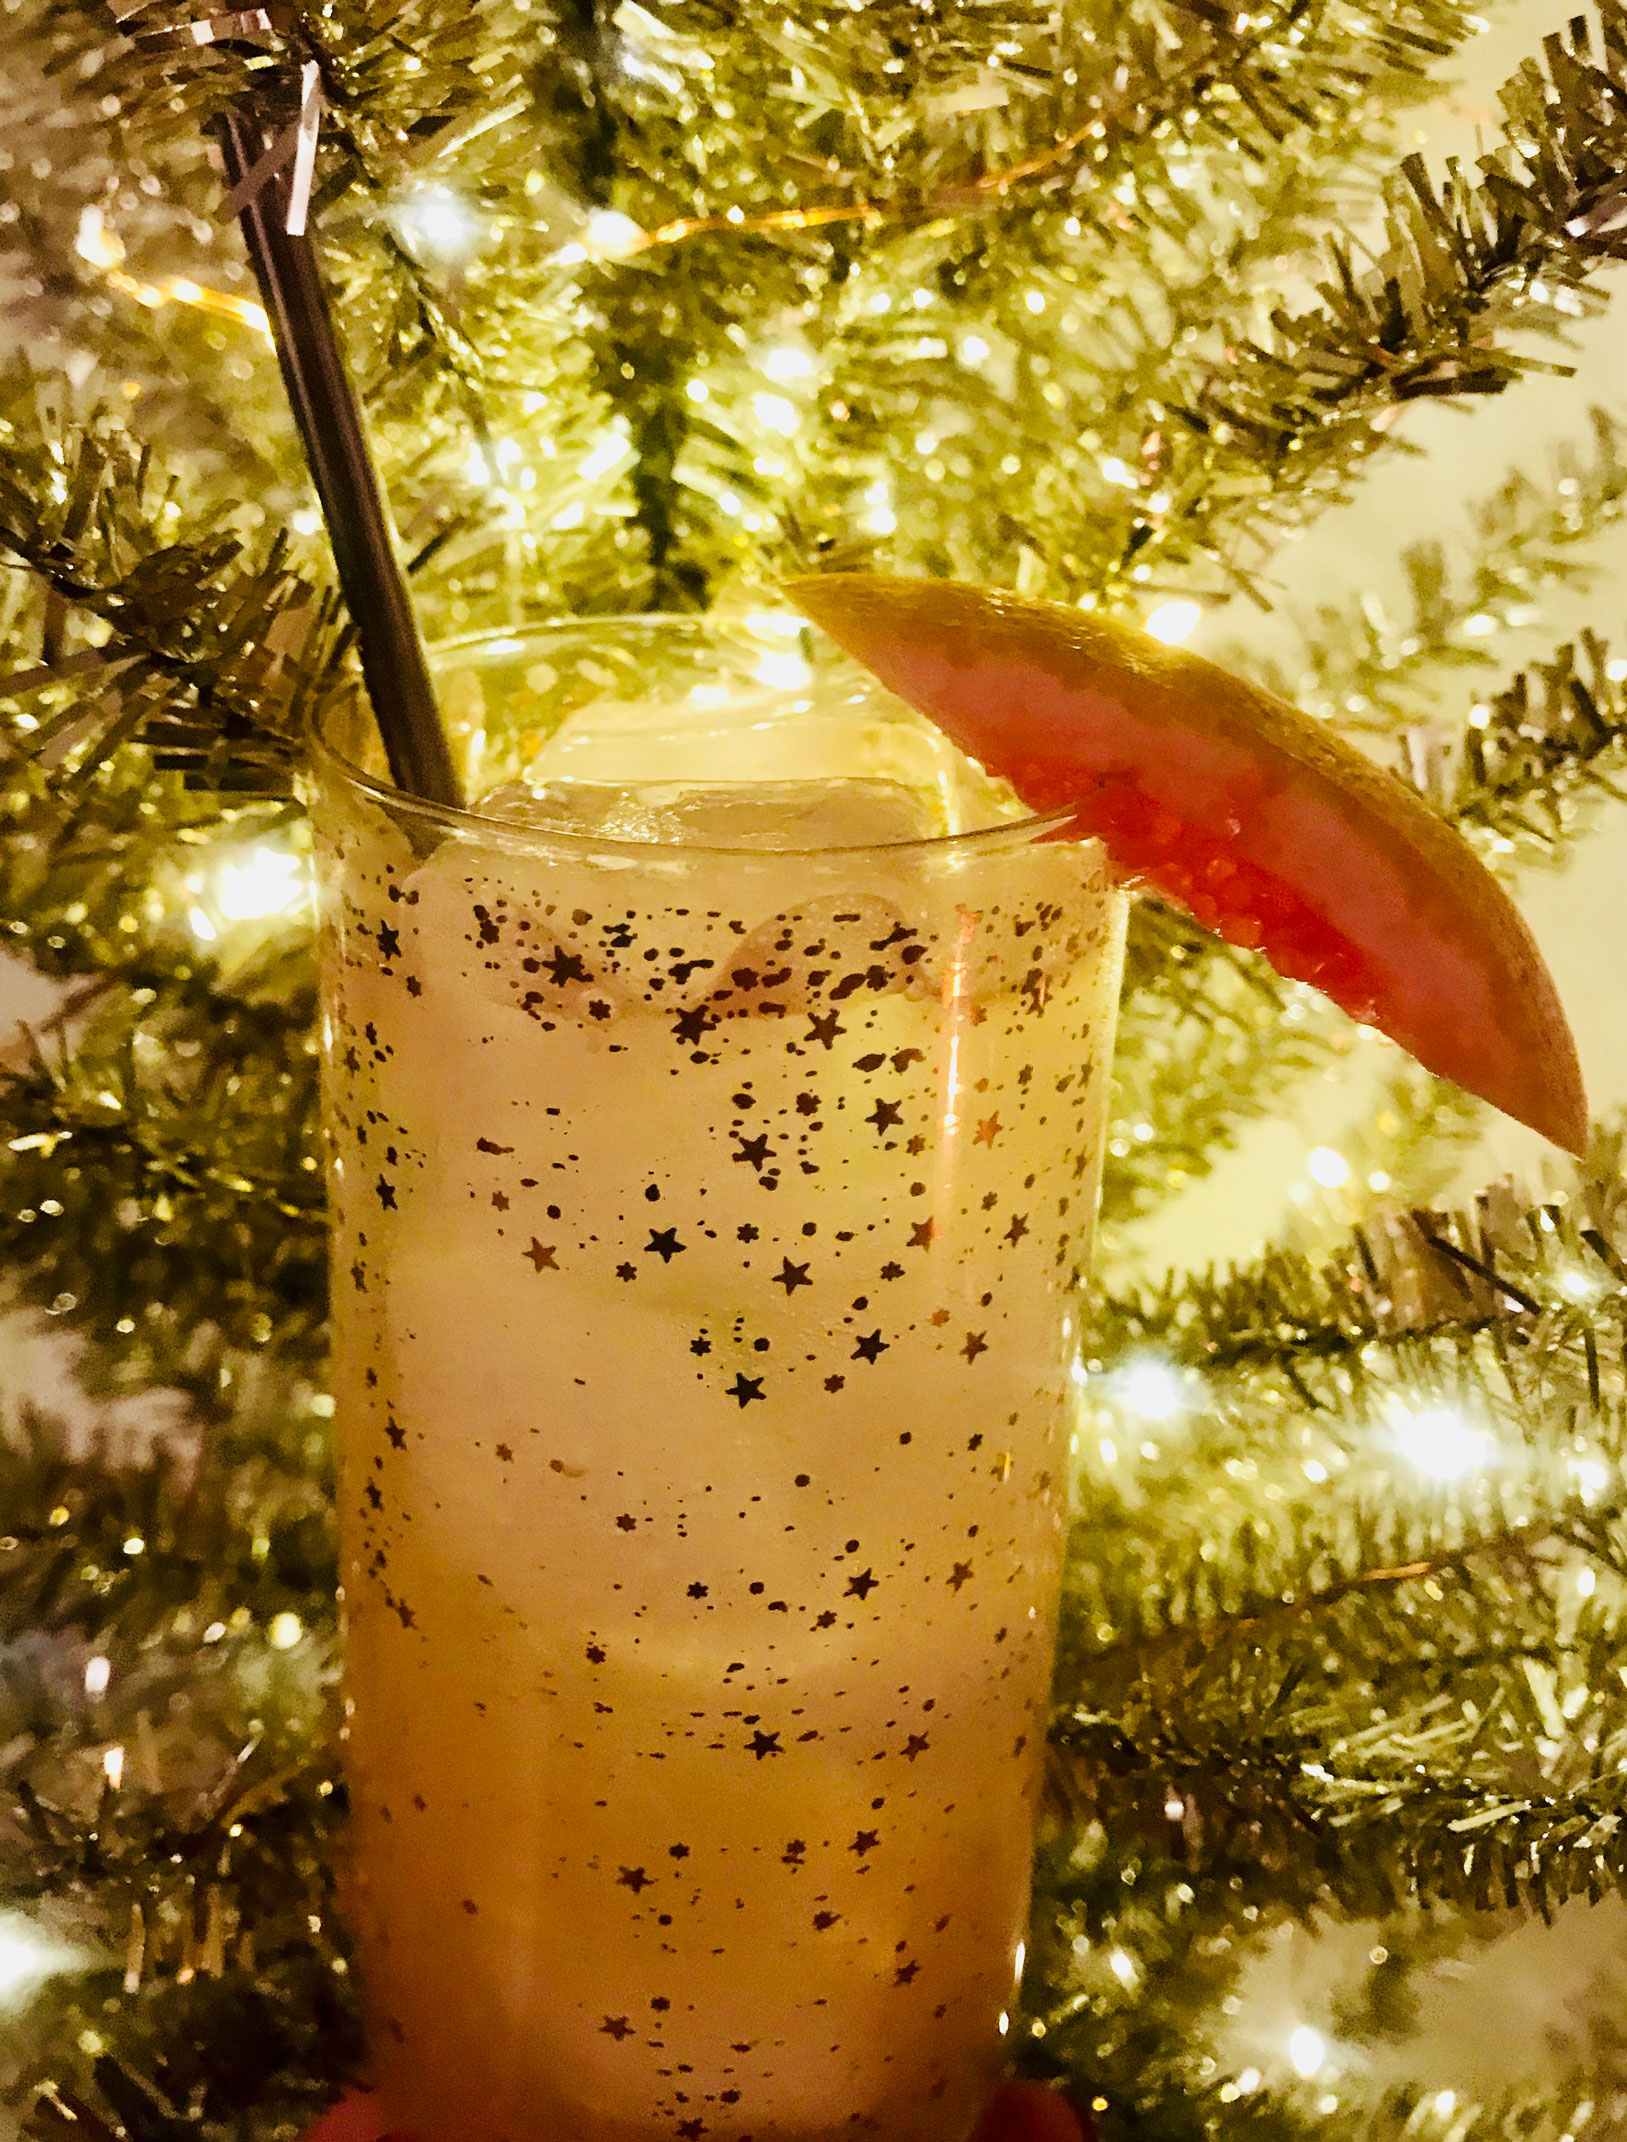 Georgette Moger photographed her New Year Grapefruit Collins cocktail